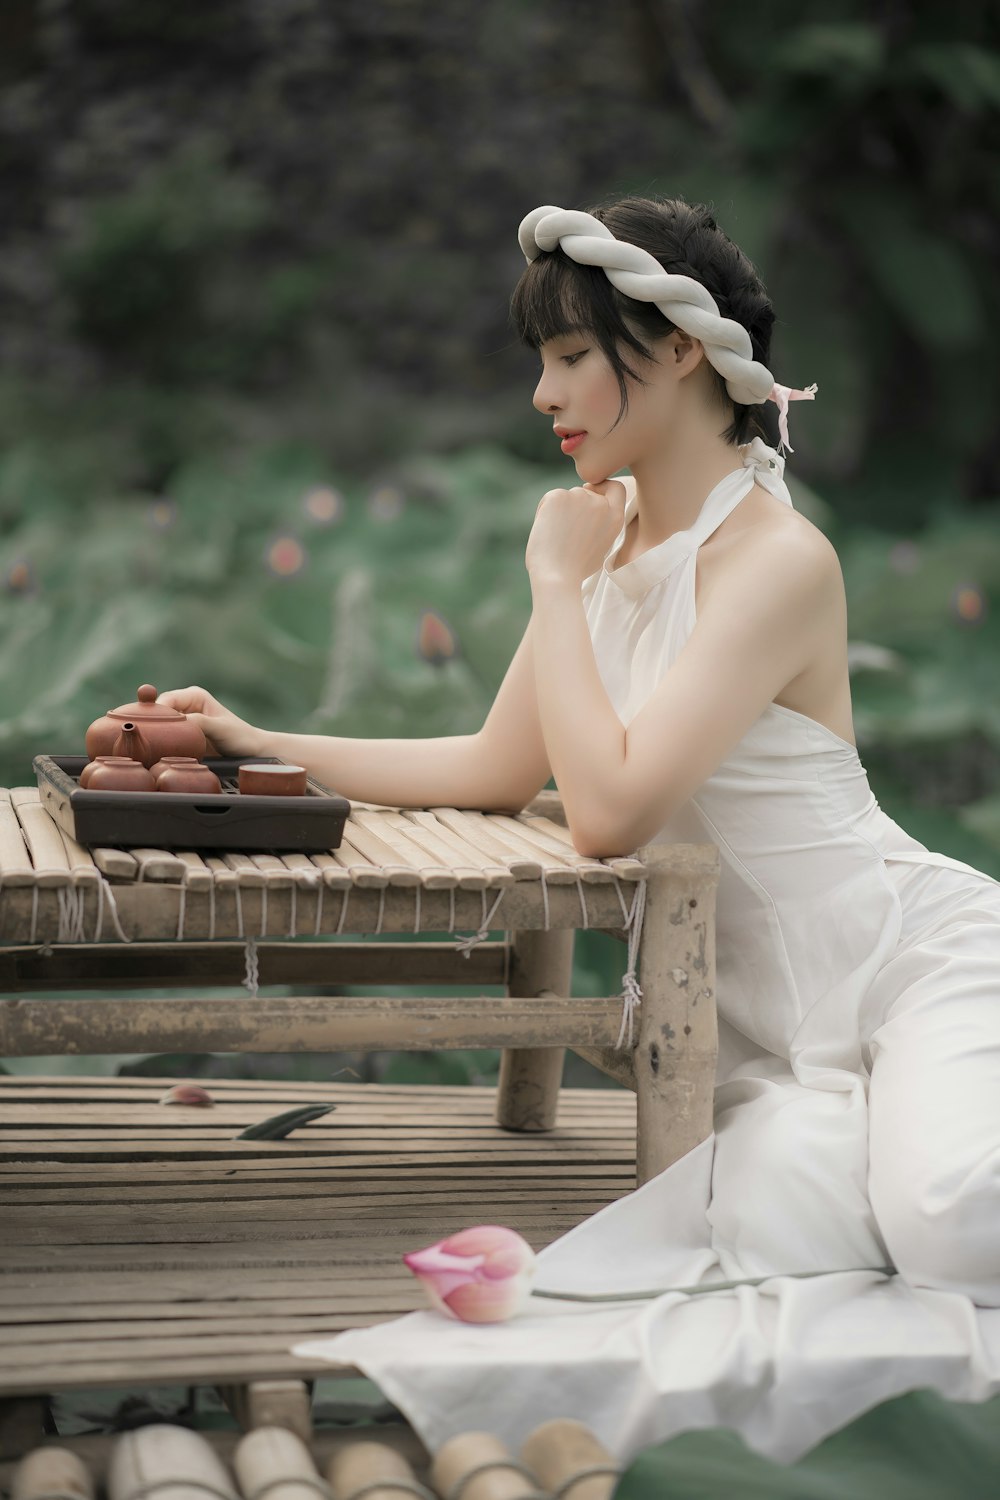 woman in white dress sitting on brown wooden bench